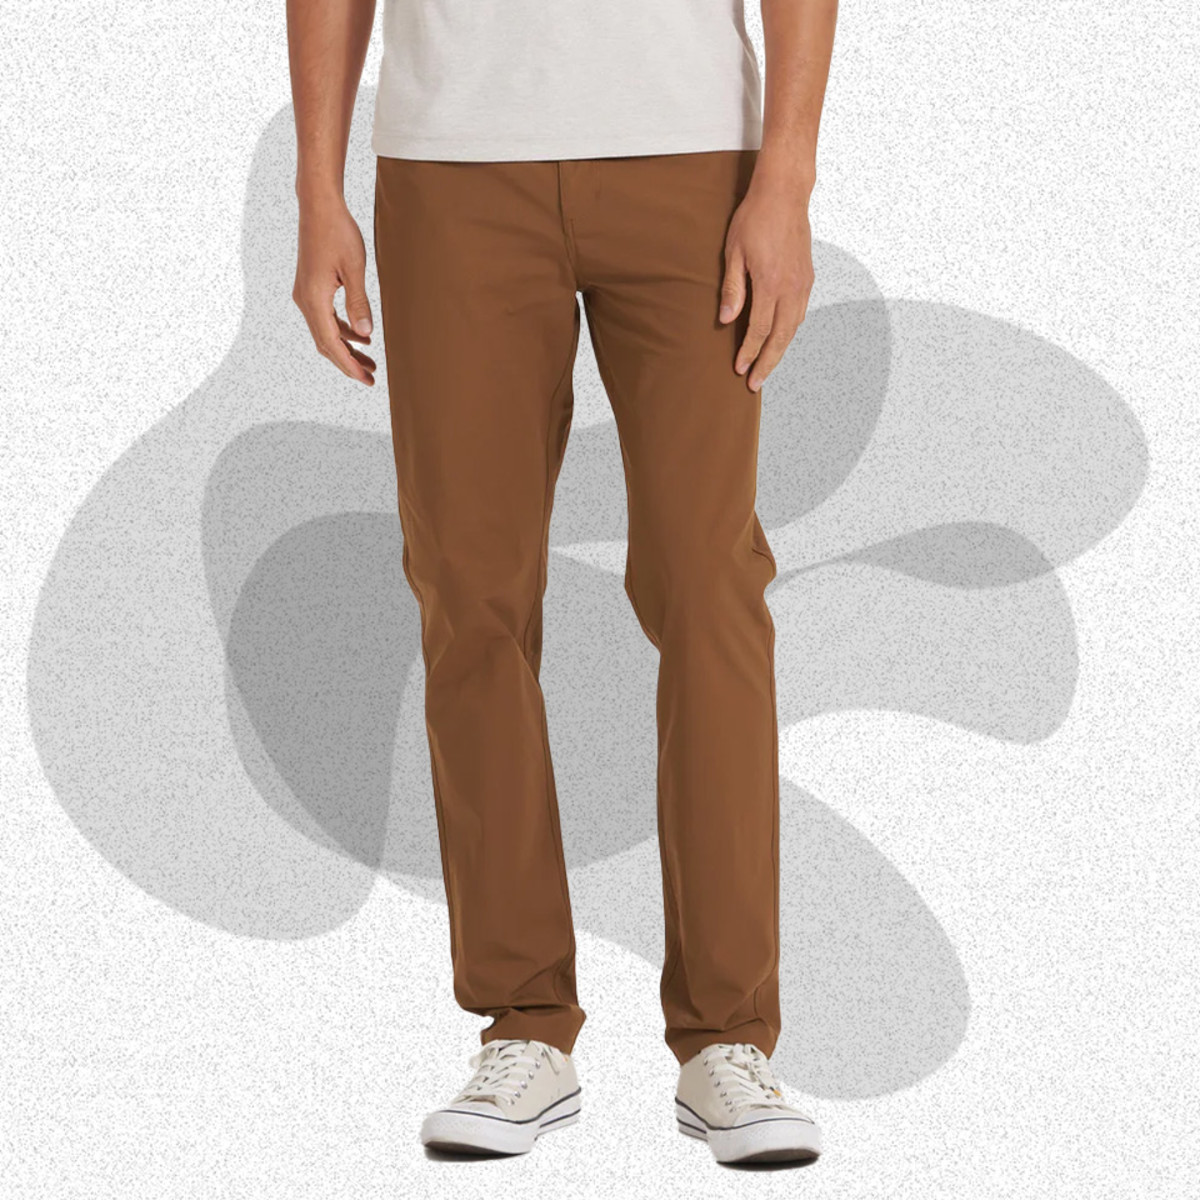 How to Wear Beige Pants - 7 Beige Pant Outfit Ideas